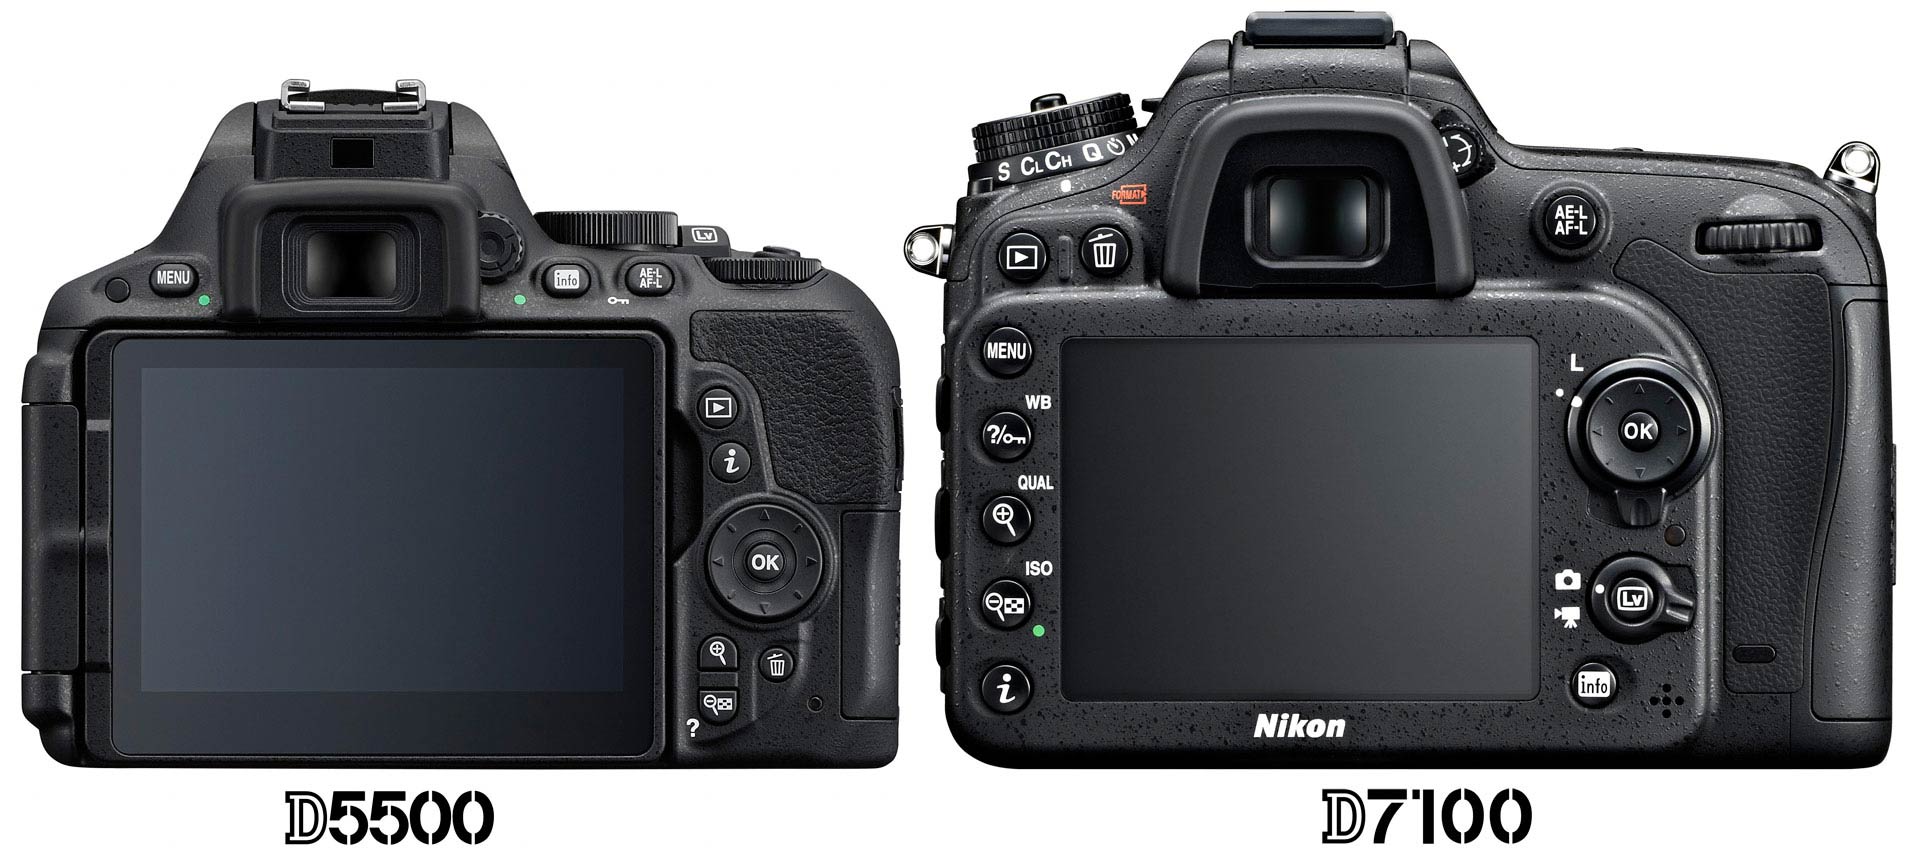 Nikon D5500 vs D7100 : Which Should You Buy? – Light And Matter